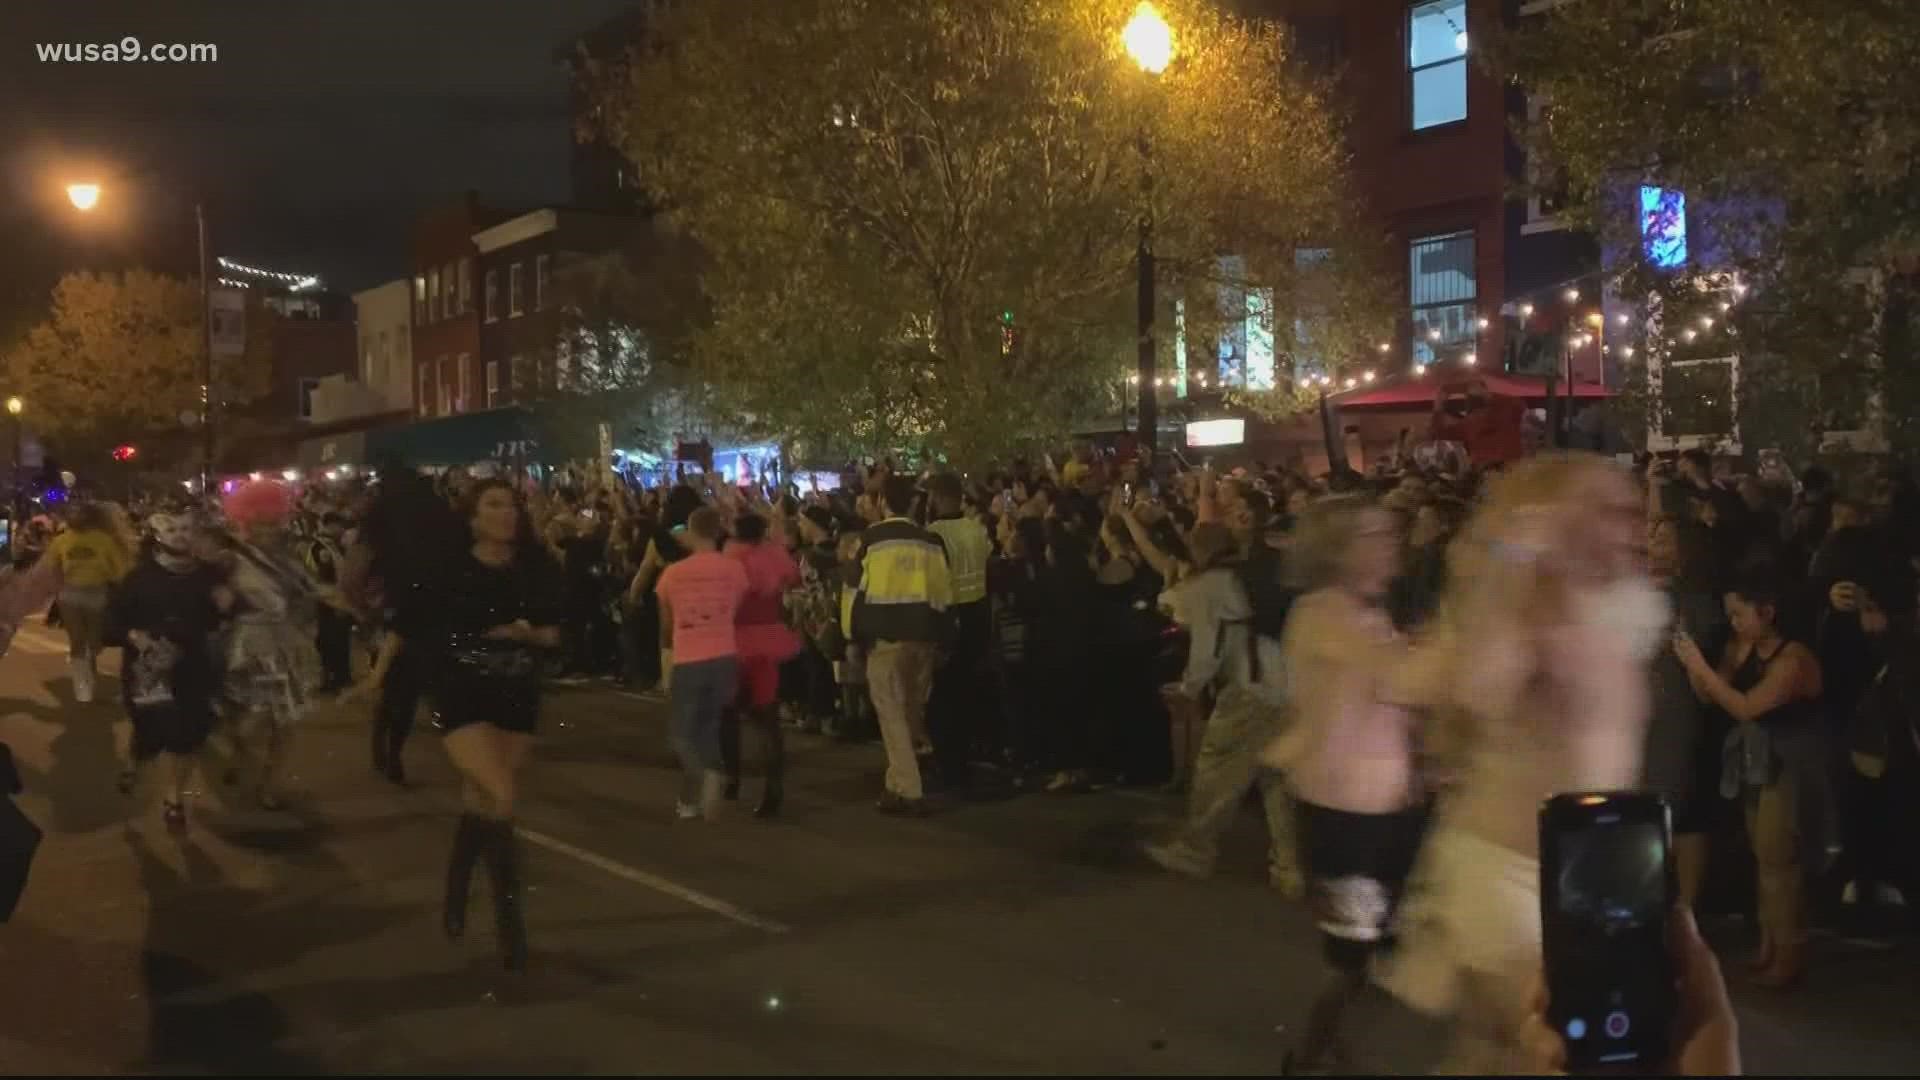 Thousands of people are expected to be on 17th Street in D.C. with their finest high heels and costumes for the annual 17th Street High Heel Race.